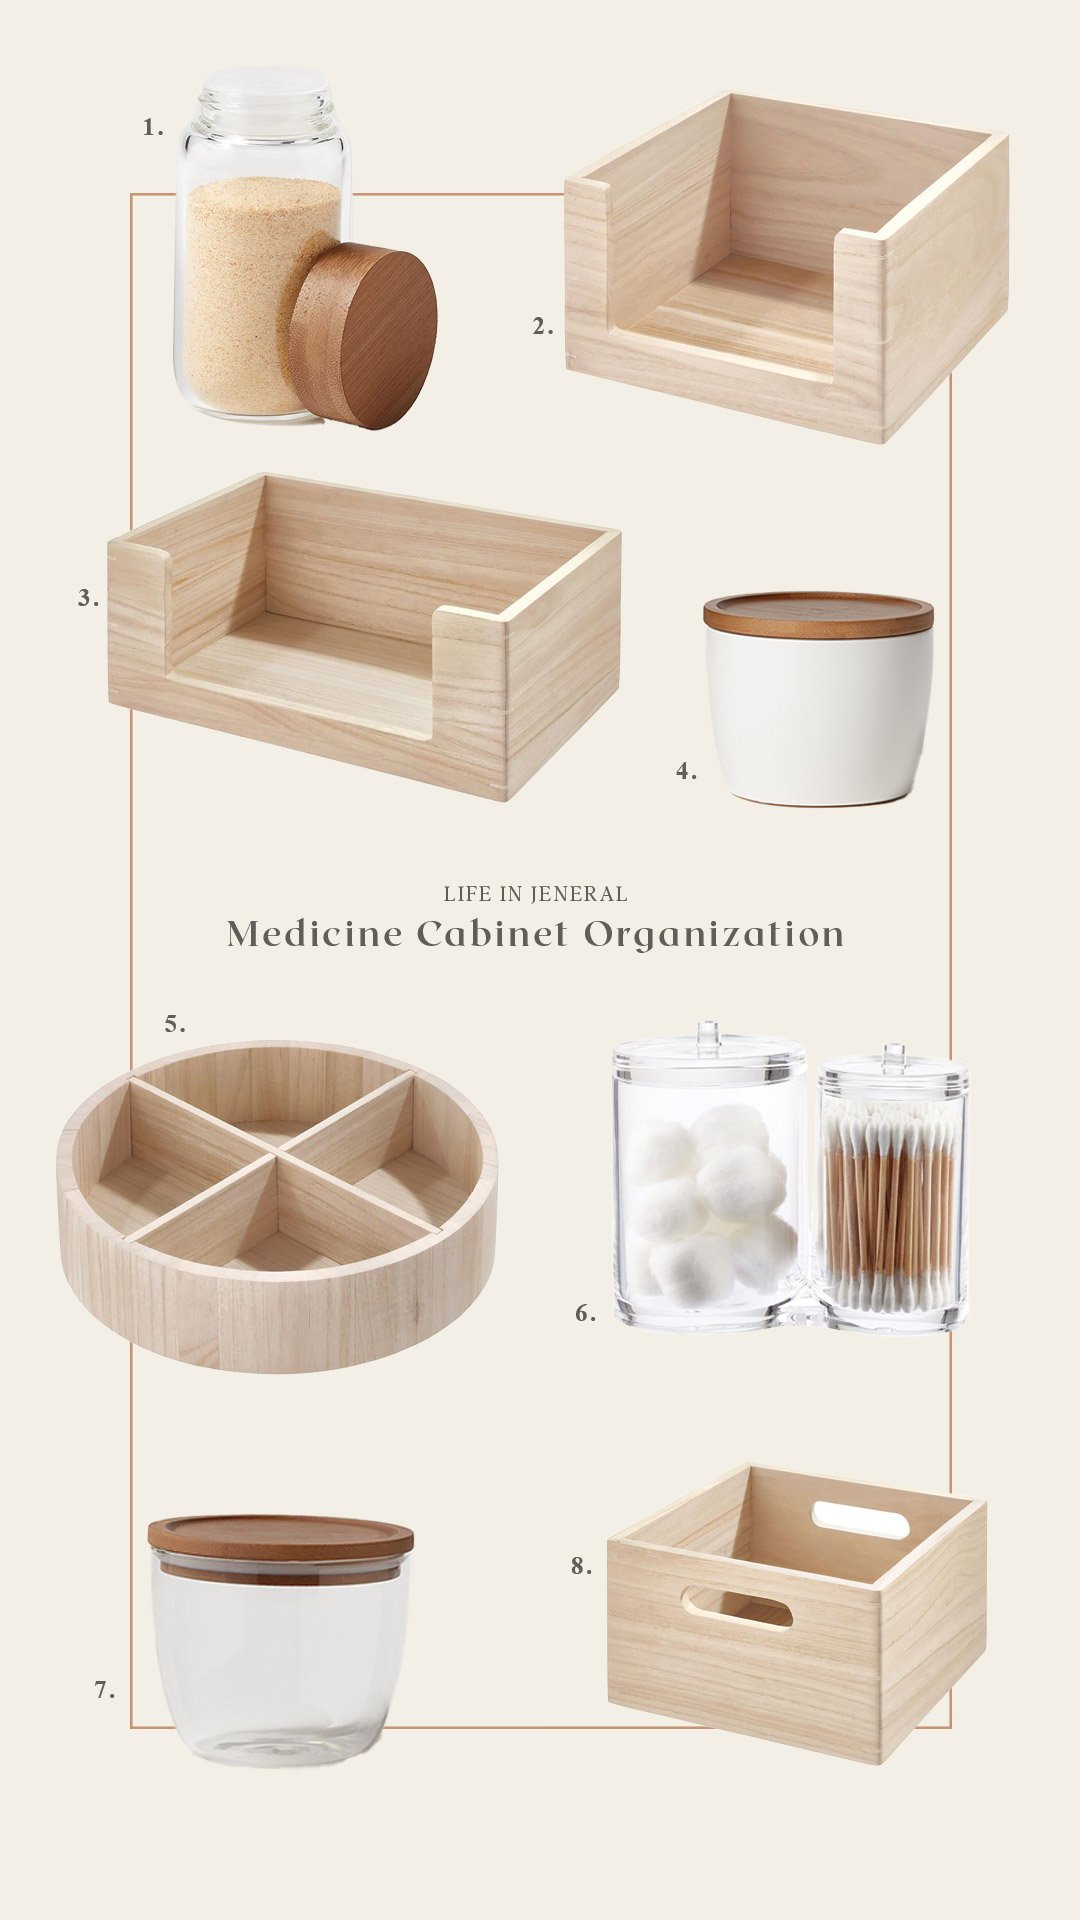 Medicine Cabinet Organization: Your Complete Guide - Clutter Keeper®